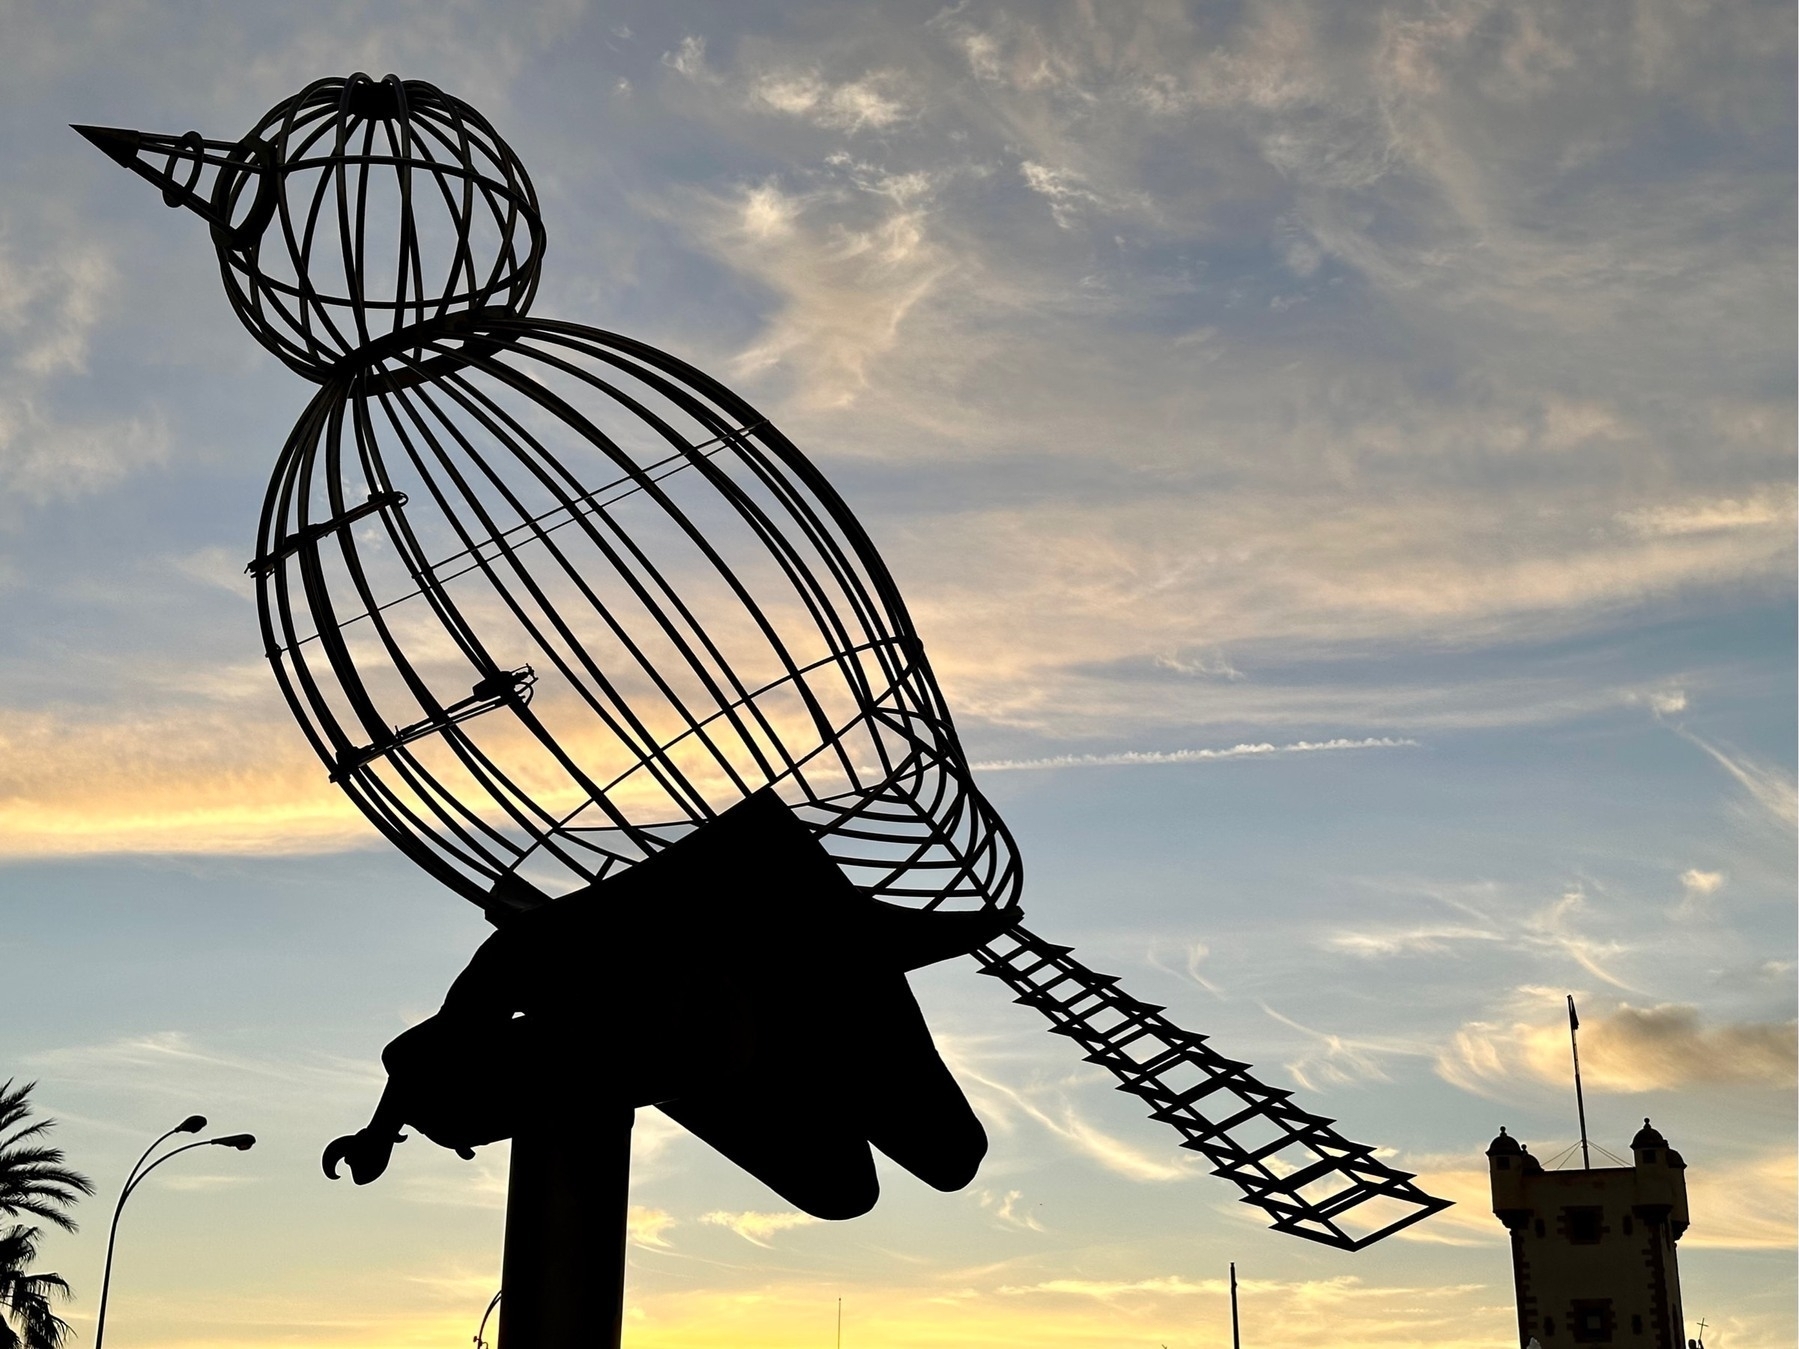 Wireframe bird sculpture in silhouette against a setting sky, a turret in the background